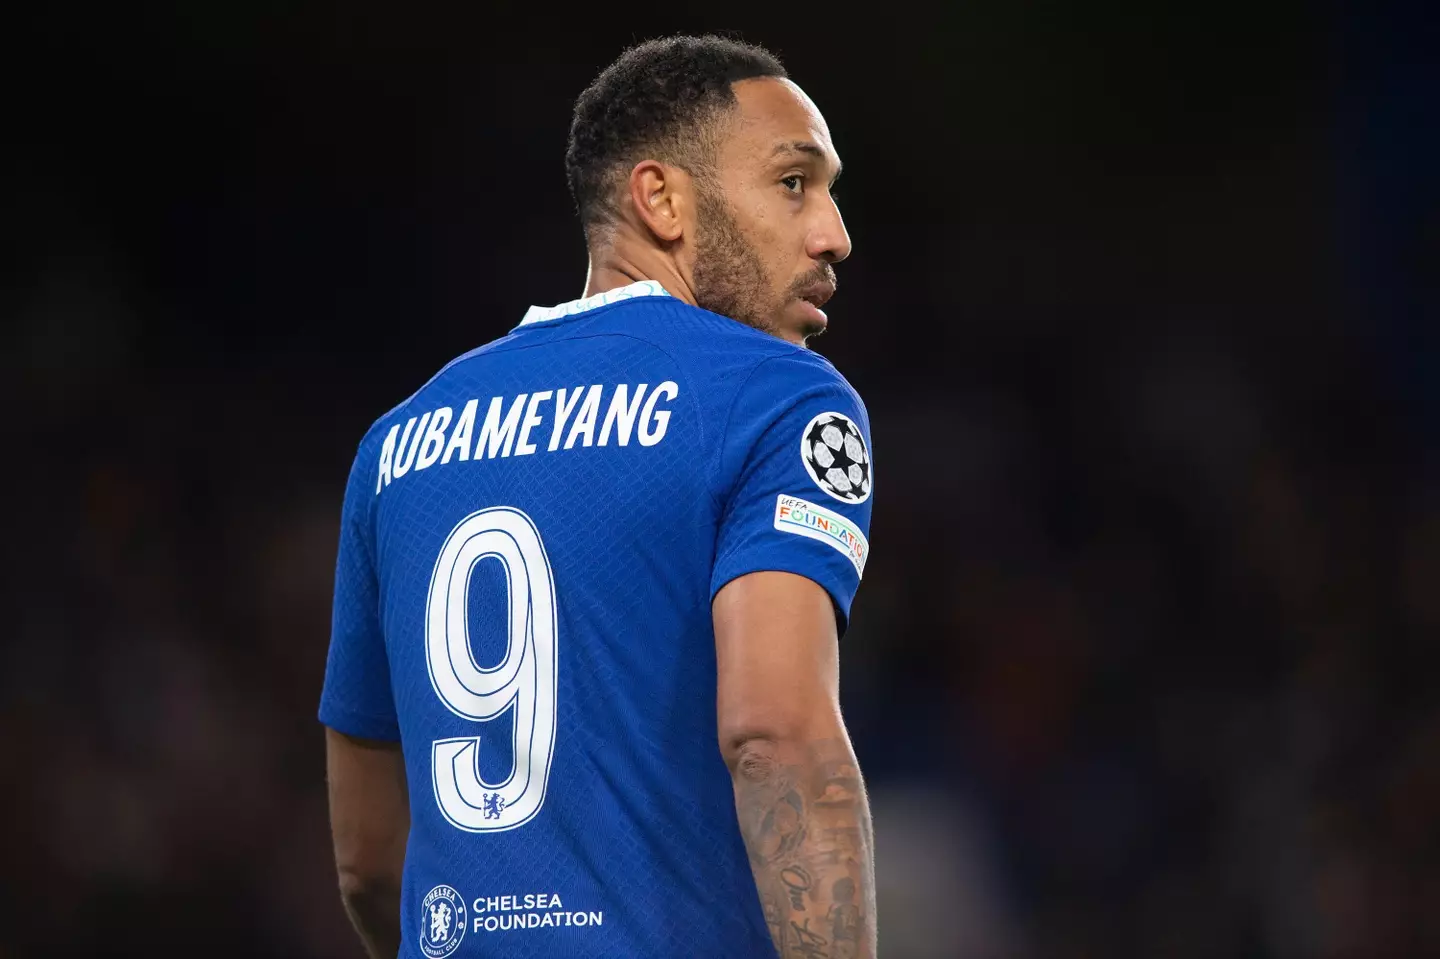 Pierre-Emerick Aubameyang of Chelsea during the UEFA Champions League match between Chelsea and Dinamo Zagreb. (Alamy)